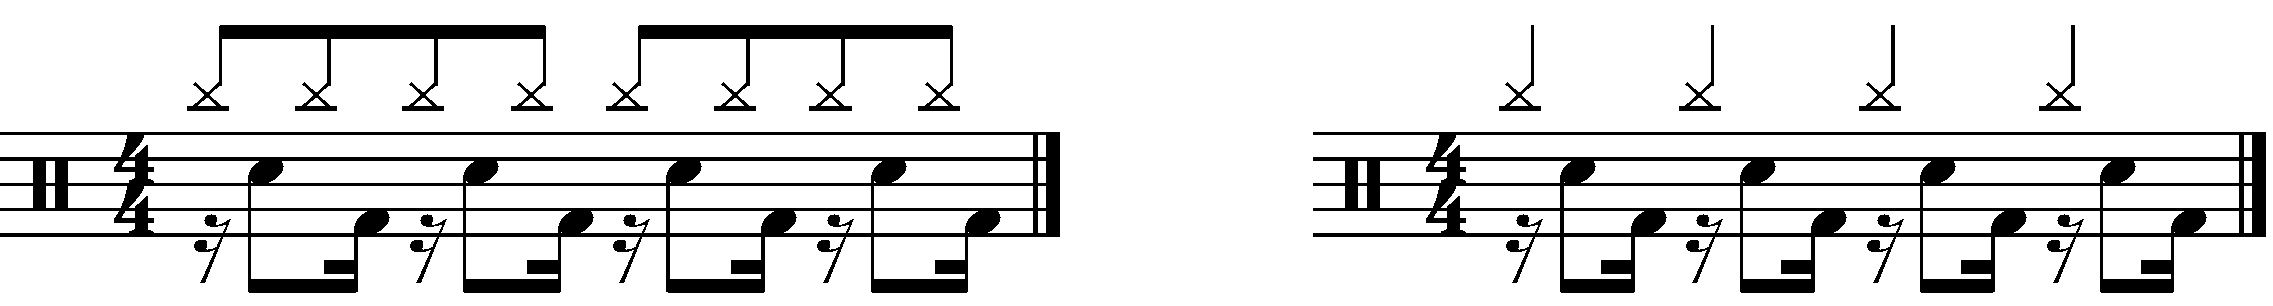 A 16th note kick snare pattern avoiding the eighth notes